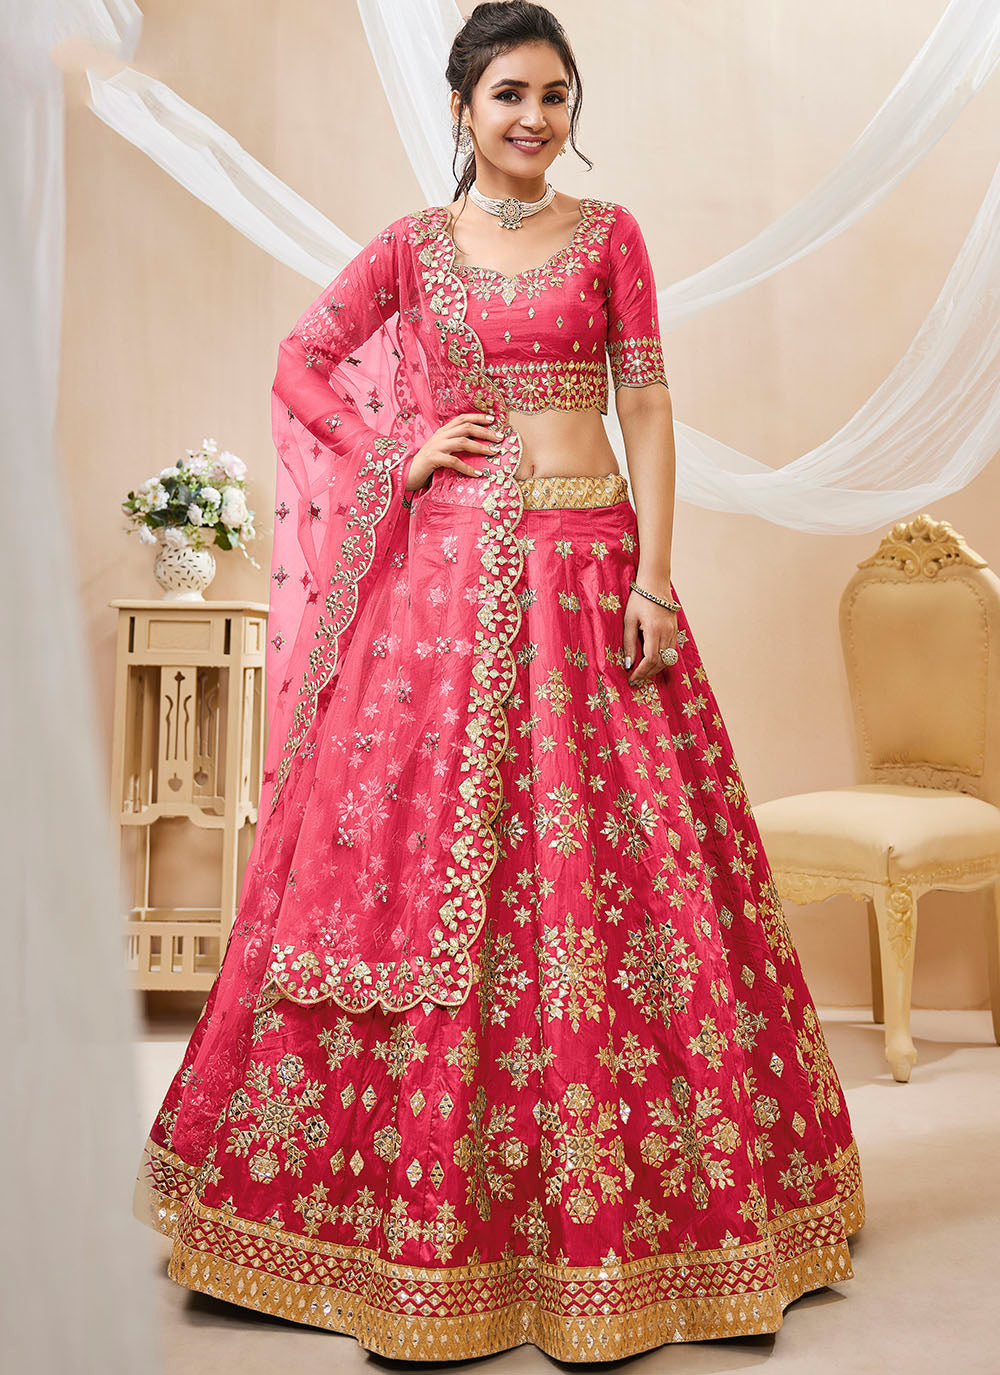 Engagement Lehengas That Will Make You Say 